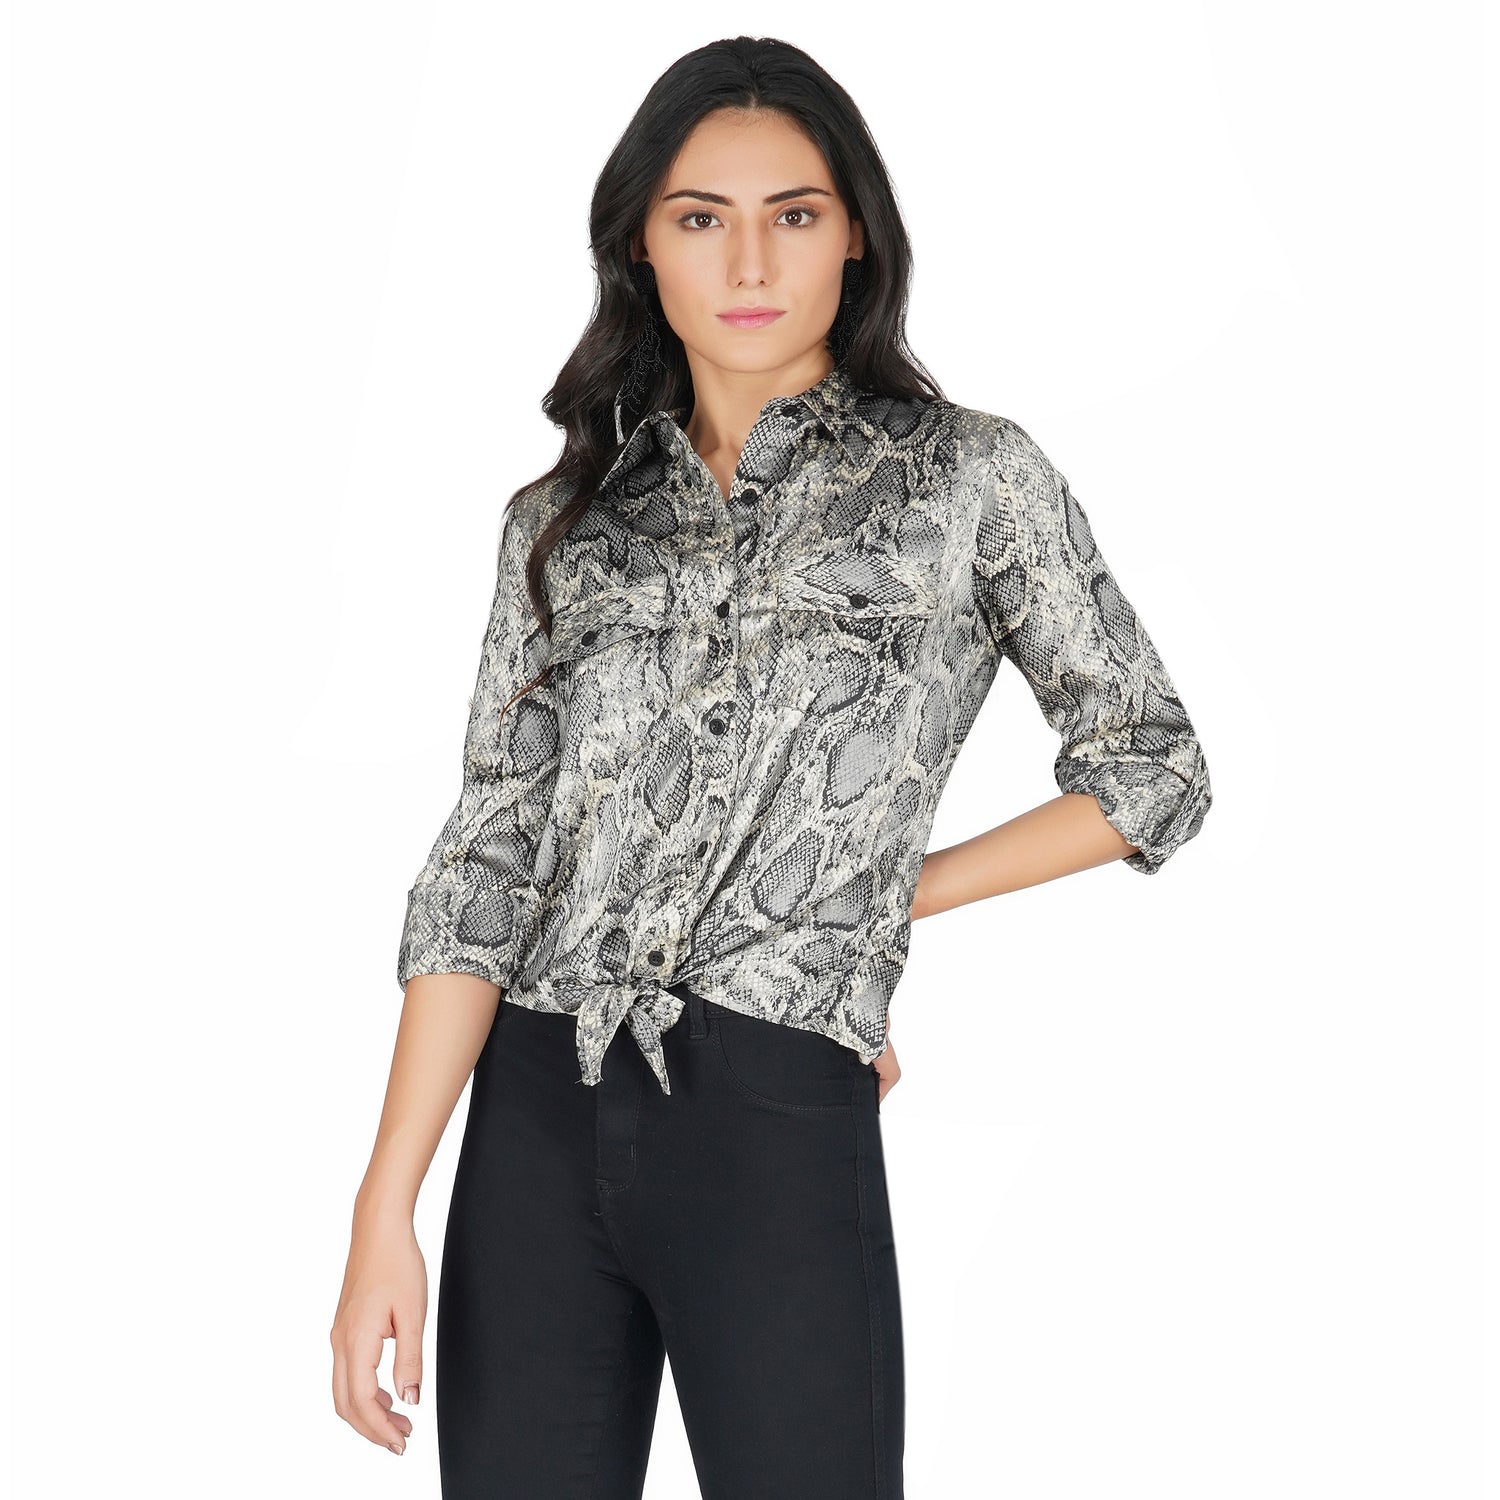 SLAY. Women's Animal Print Shirt with Front Tie Knot & Roll Up Sleeves-clothing-to-slay.myshopify.com-Snake Print Shirt